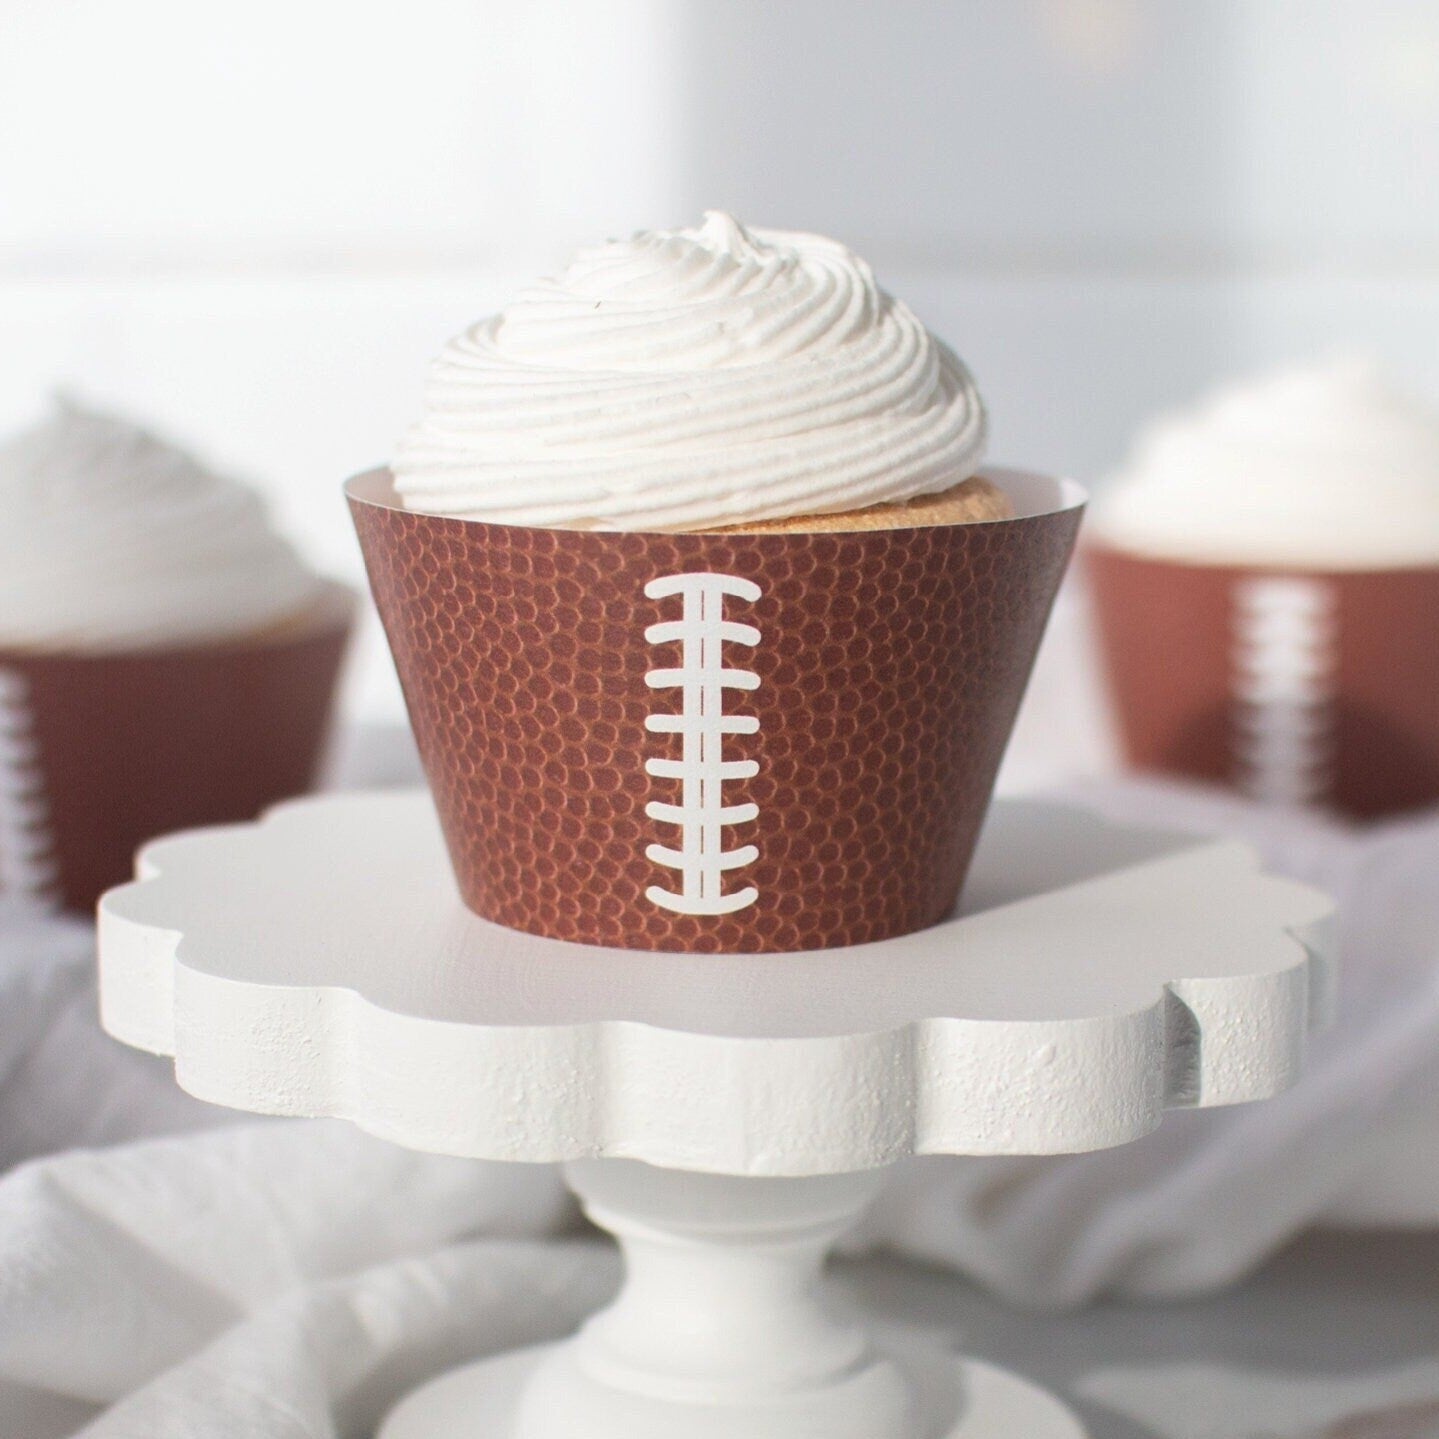 Football Cupcake Wrappers - PRINTABLE instant download PDF. American football party, sports theme birthday, fall big game watching day.